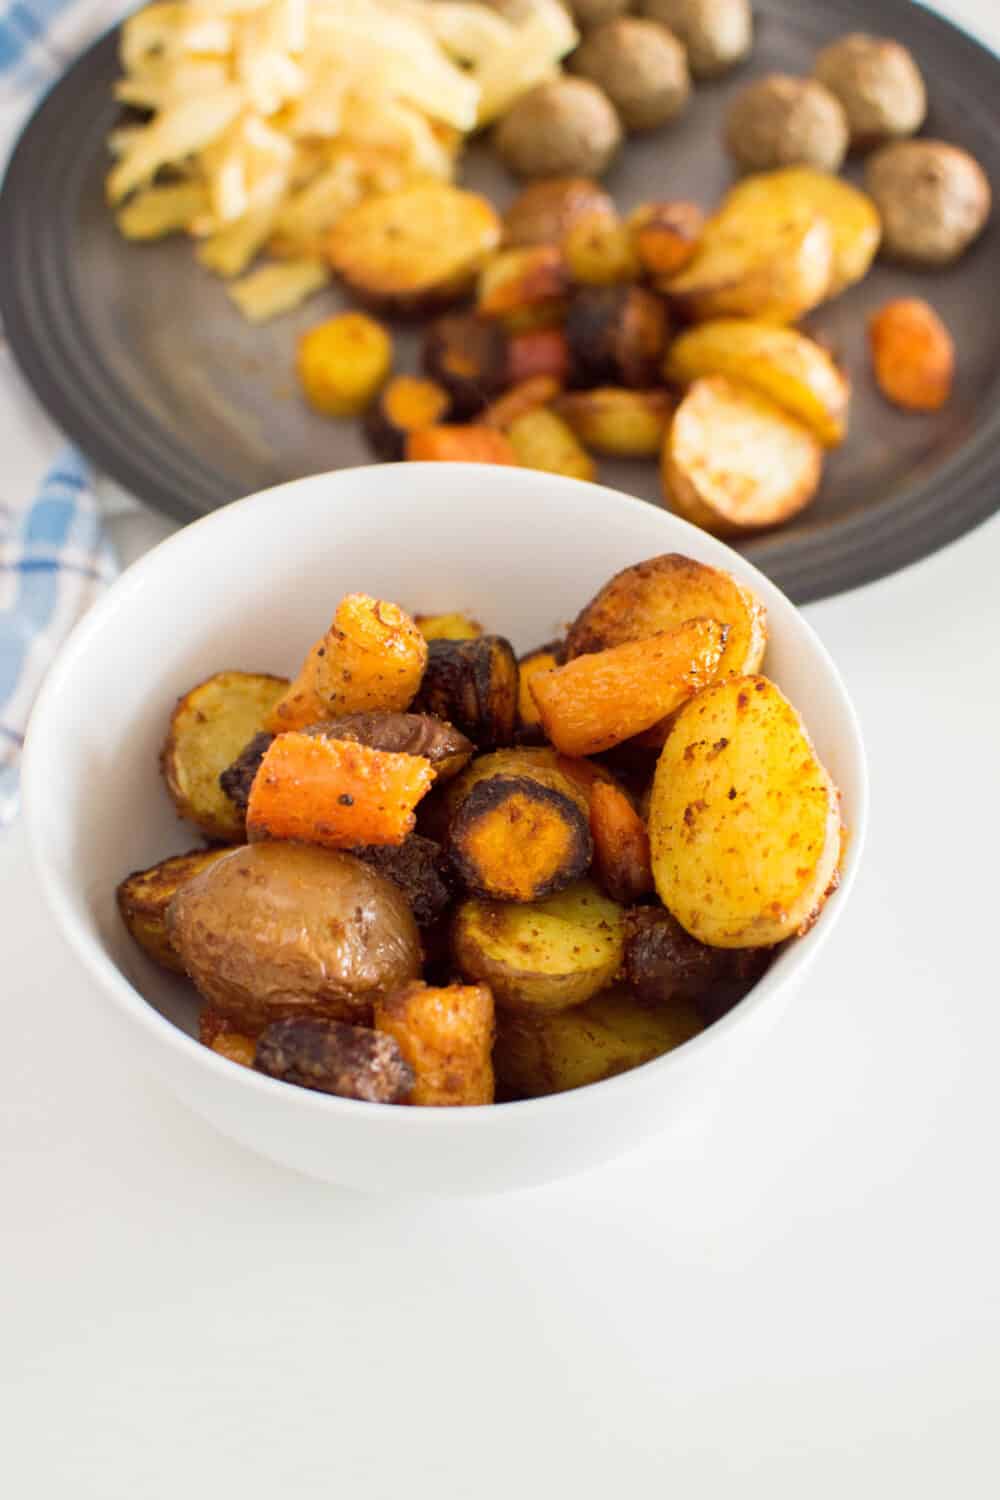 A bowl of roasted vegetables, prepared in the air fryer and ready for serving